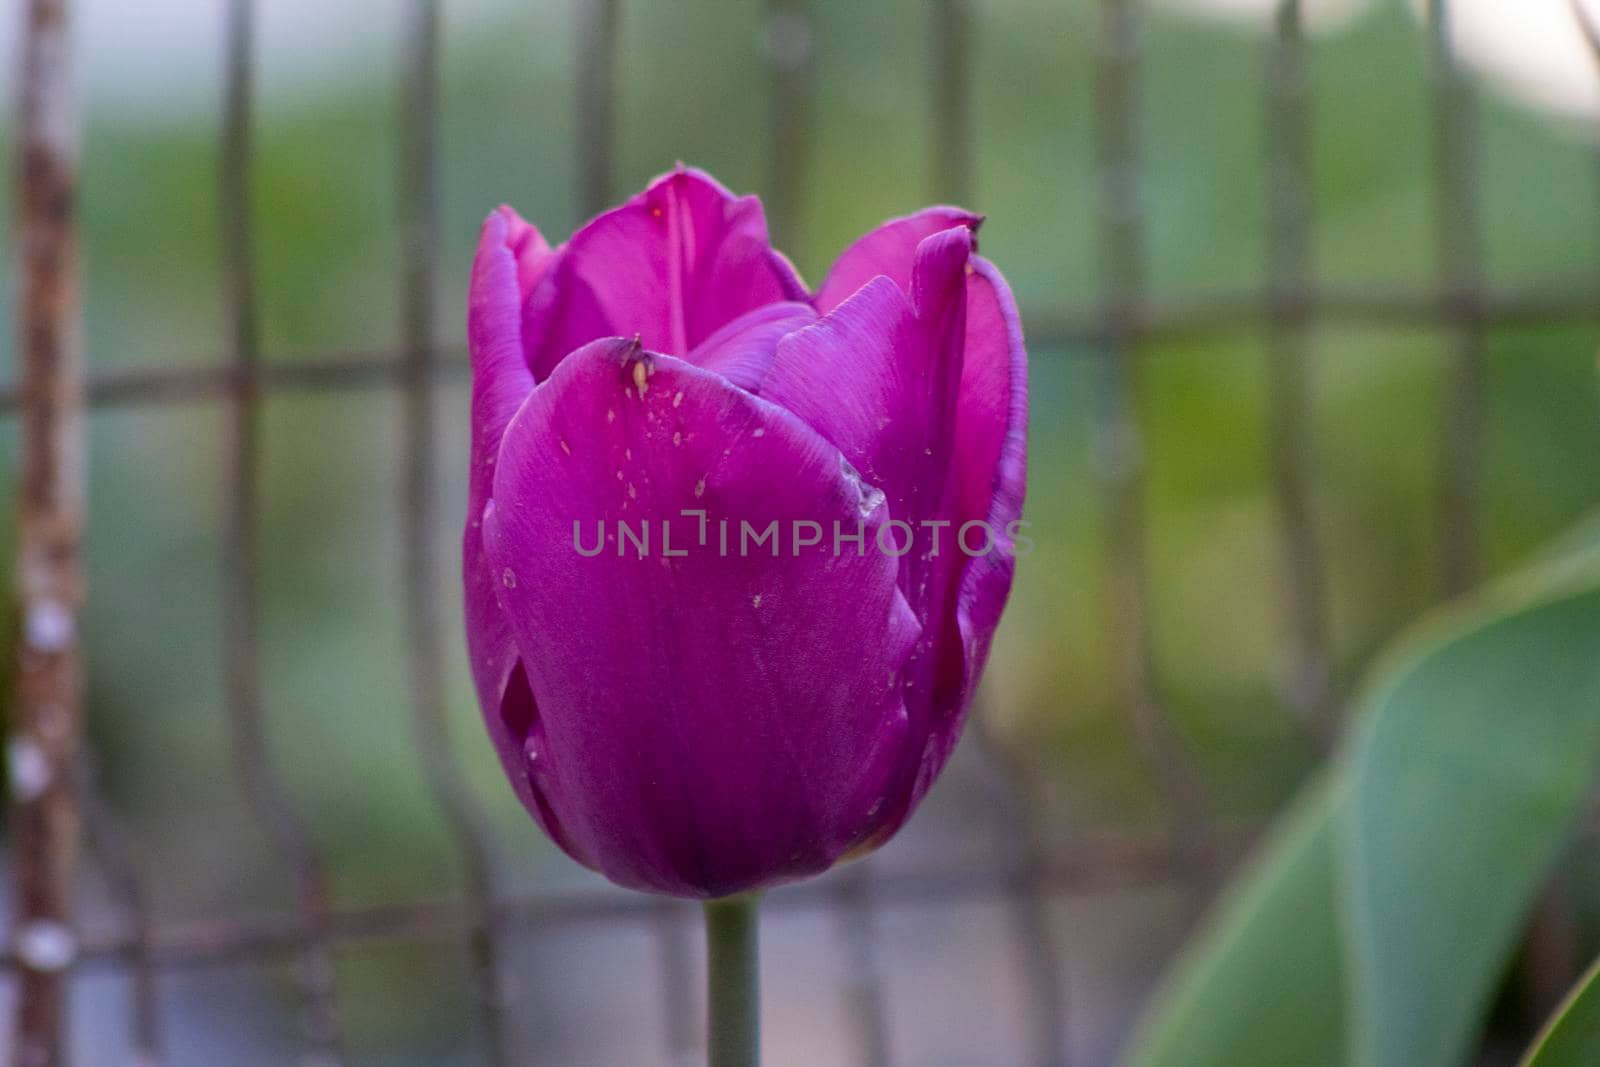 One single violet tulip flower background by bybyphotography